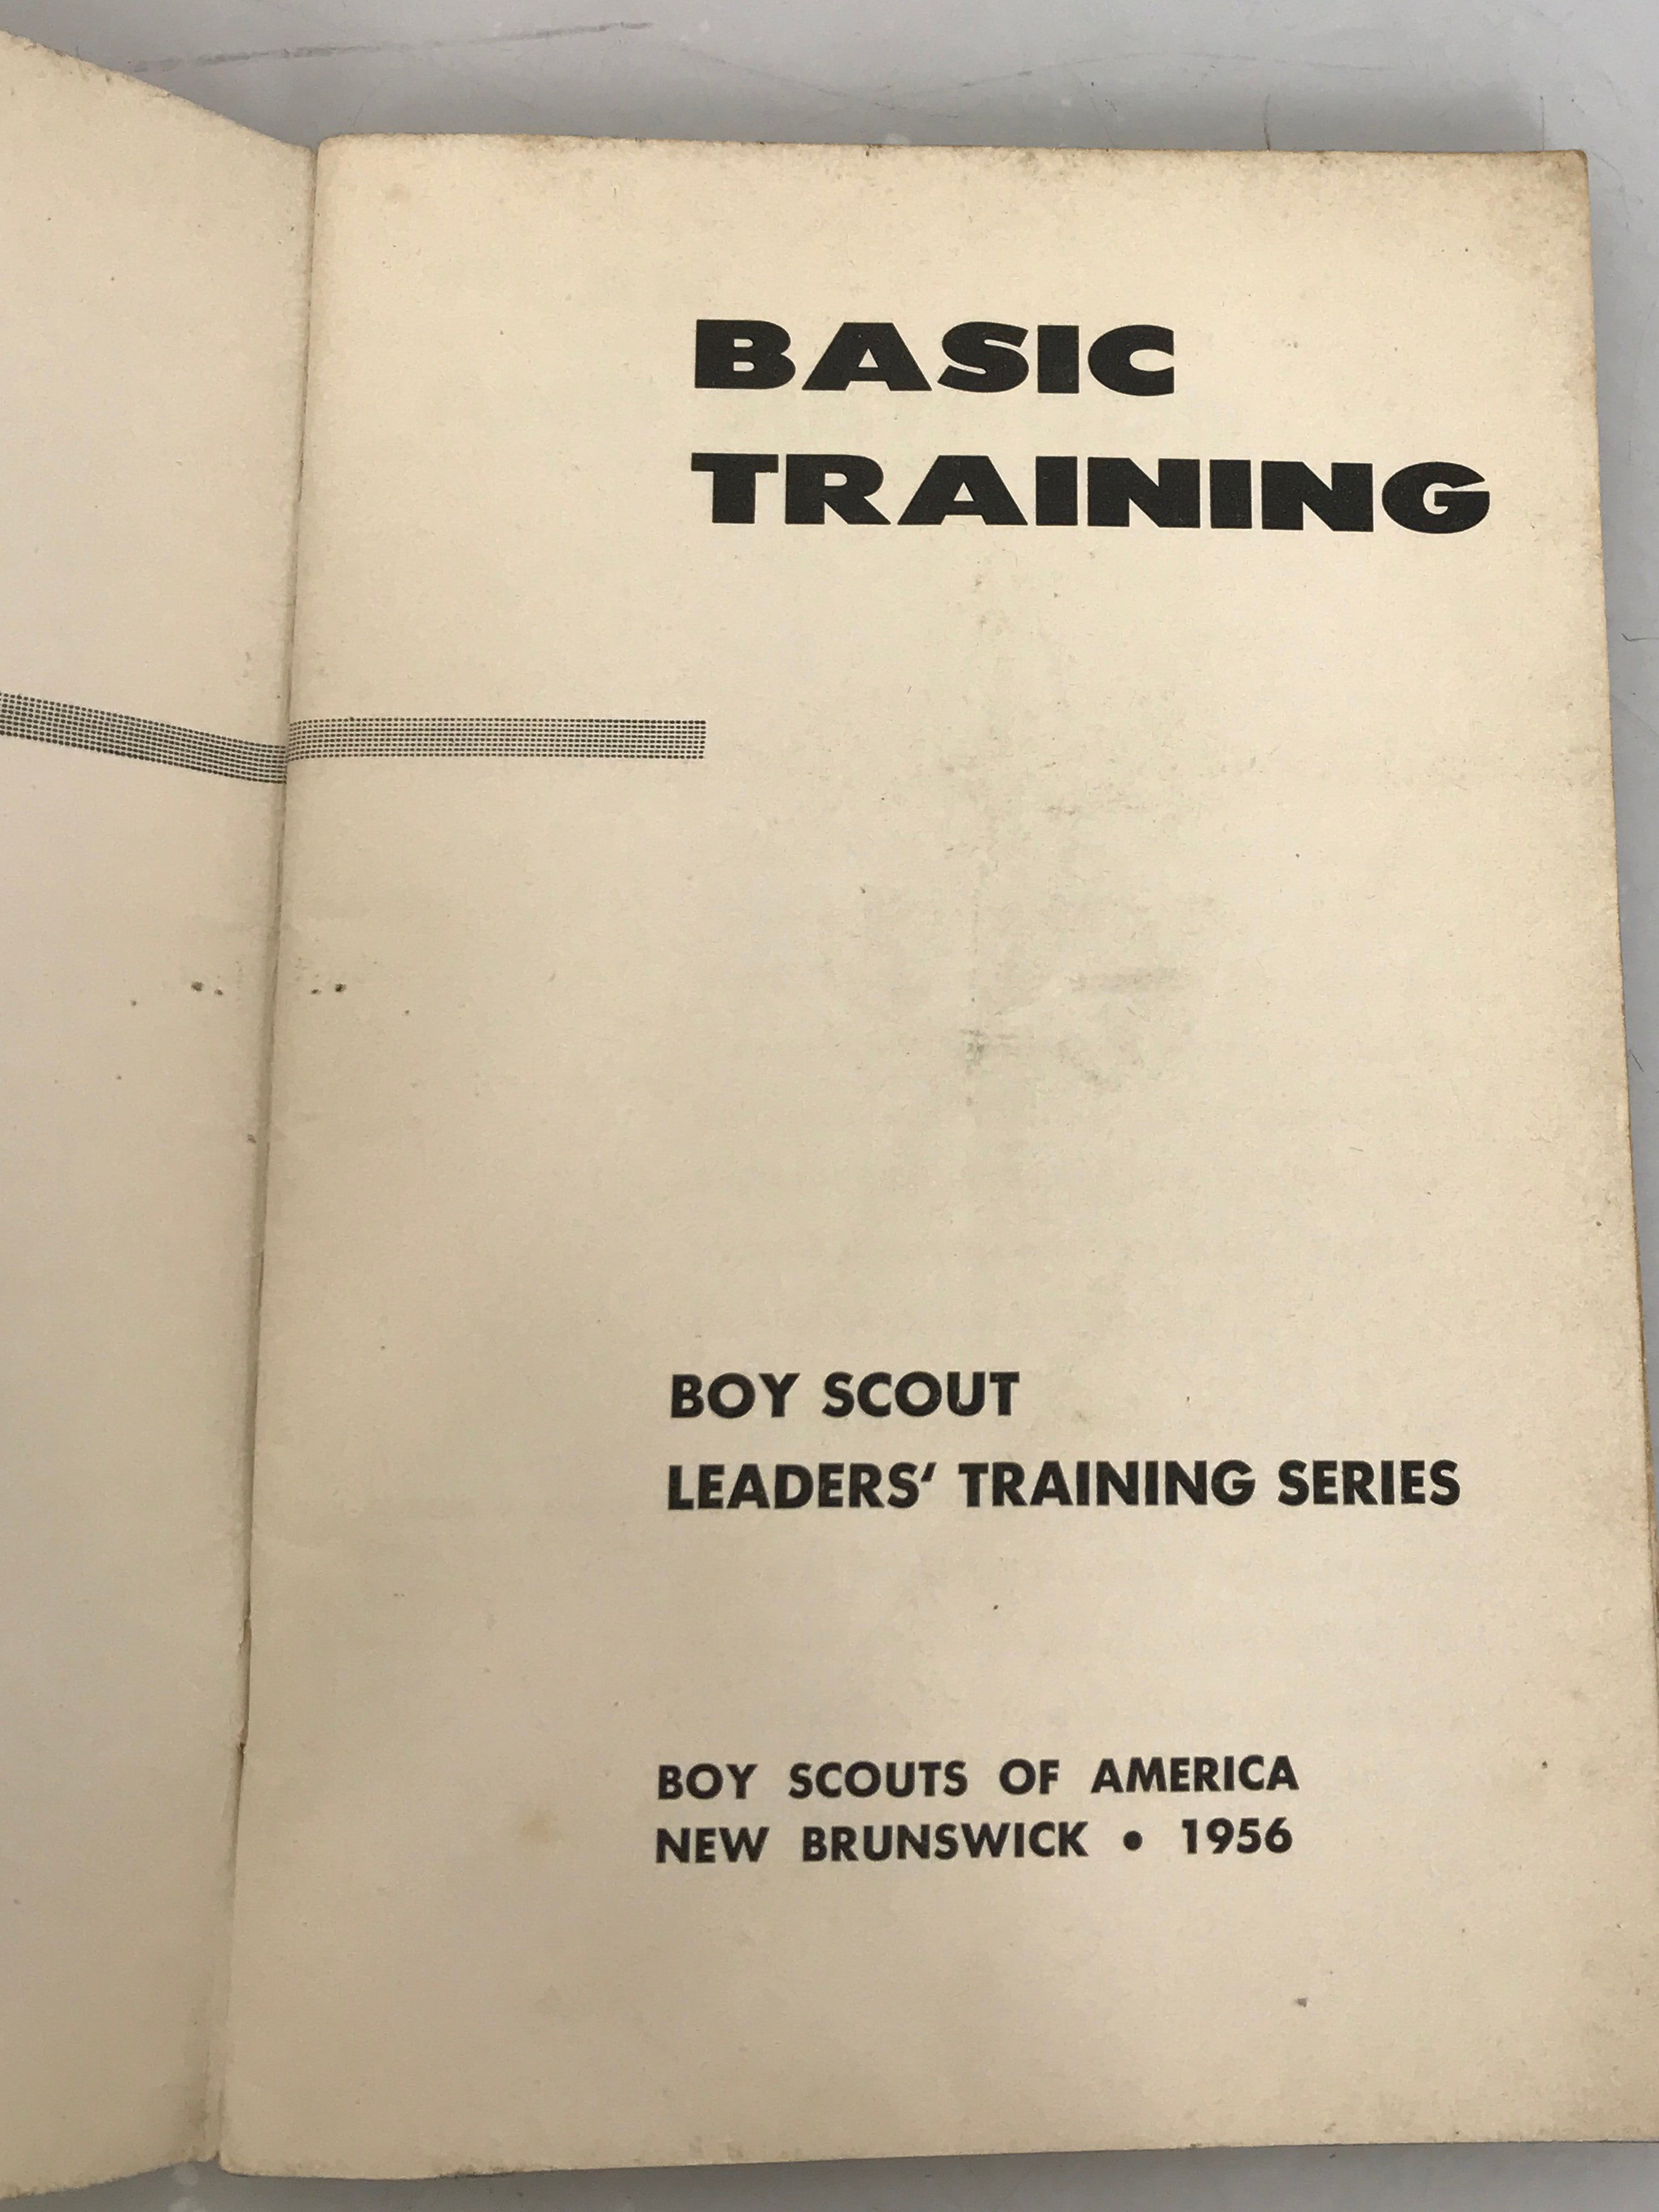 Lot of 7 Boy Scouts Merit Badge Series and Training Booklets 1942-1965 SC